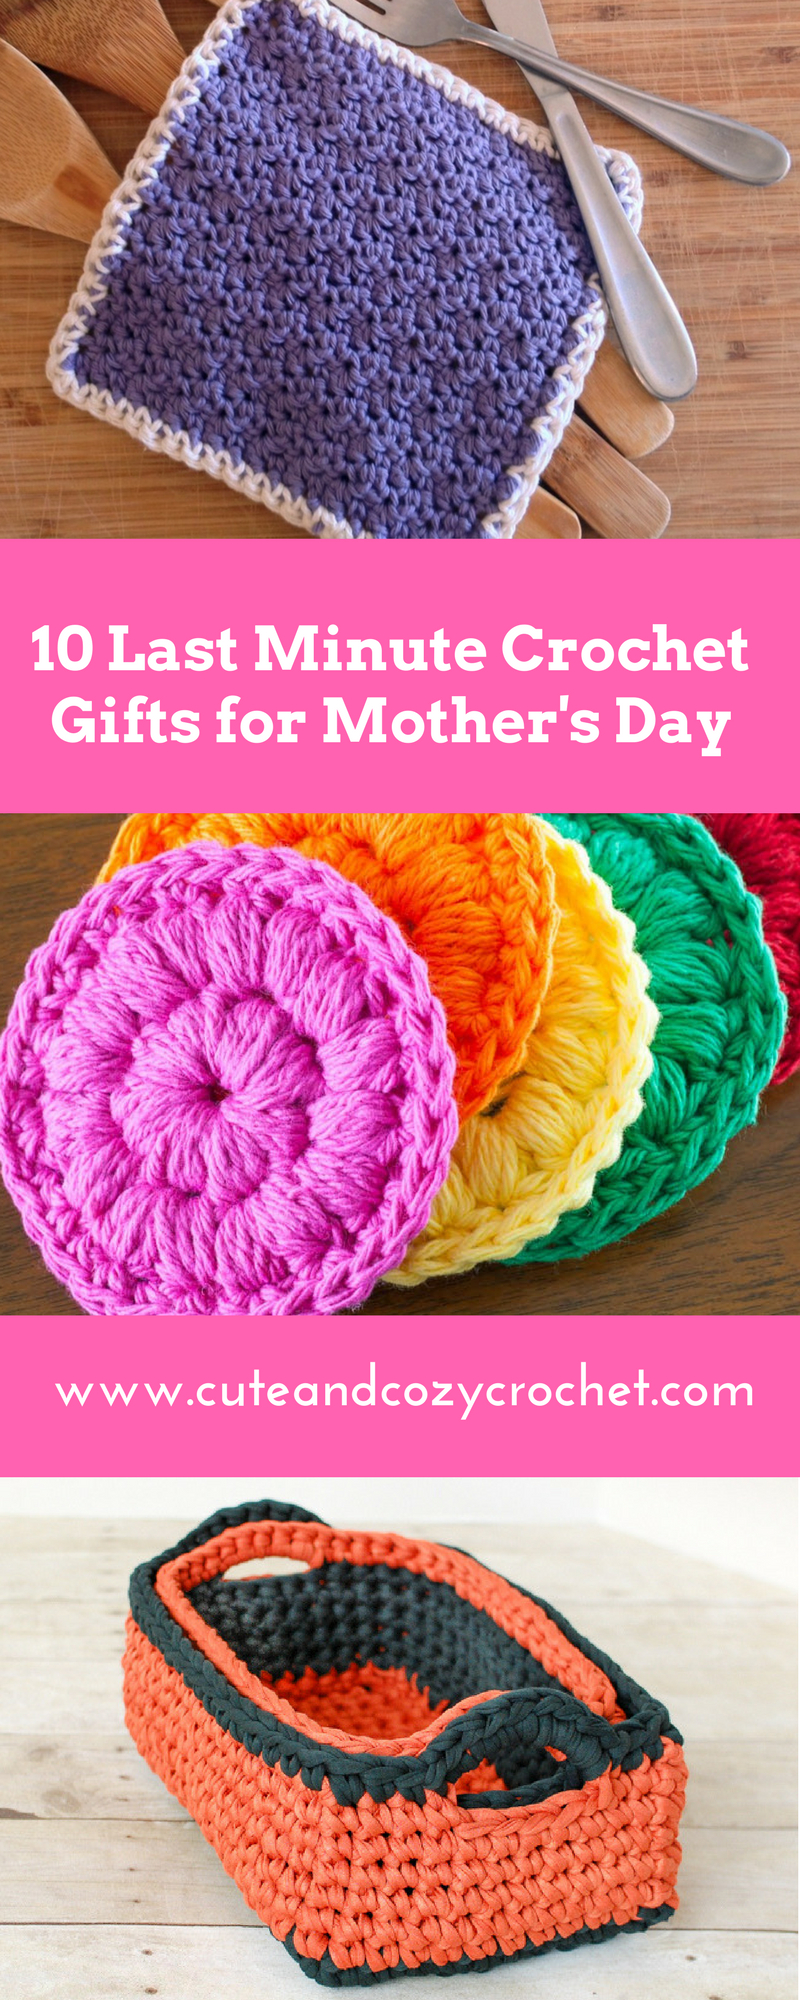 Cute Crochet Patterns 10 Last Minute Crochet Gifts For Mothers Day Crochet Ideas And